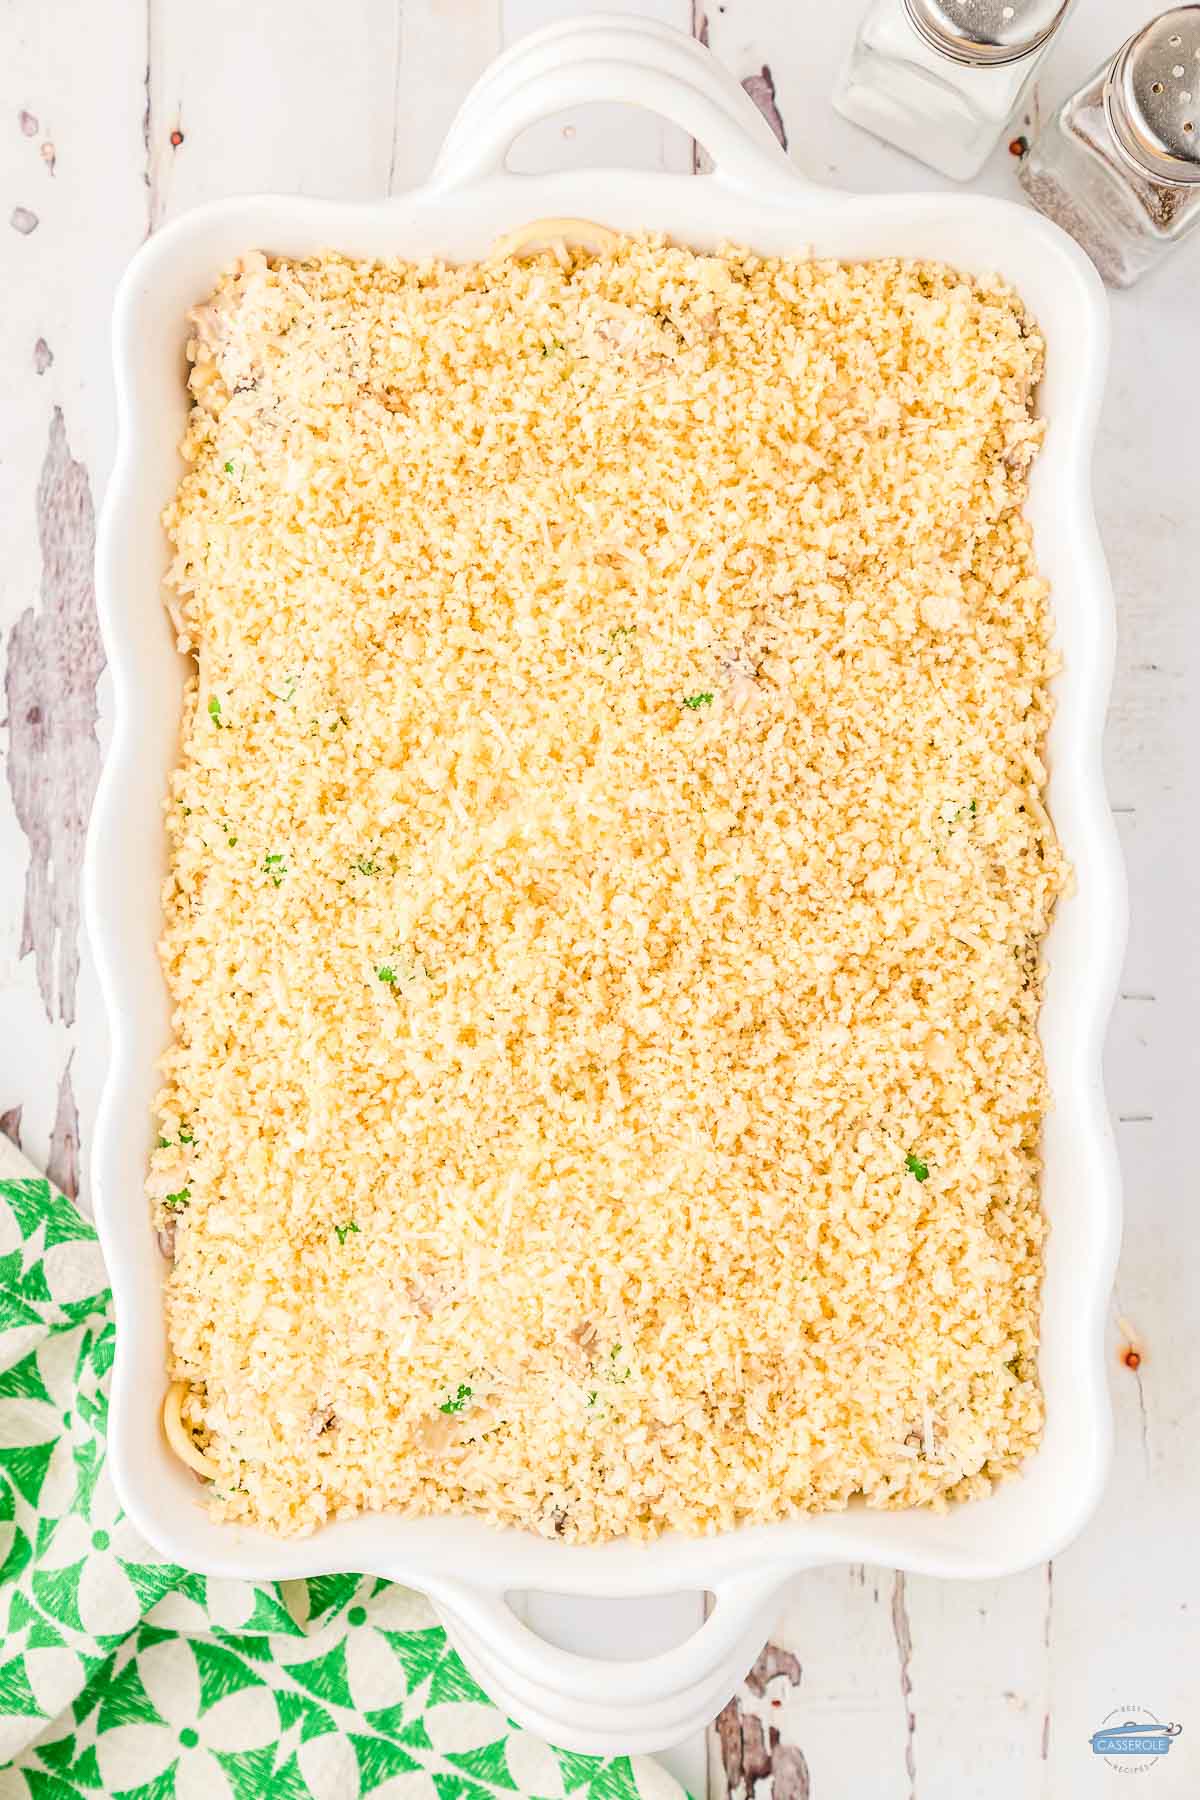 casserole topped with shredded cheese cultures